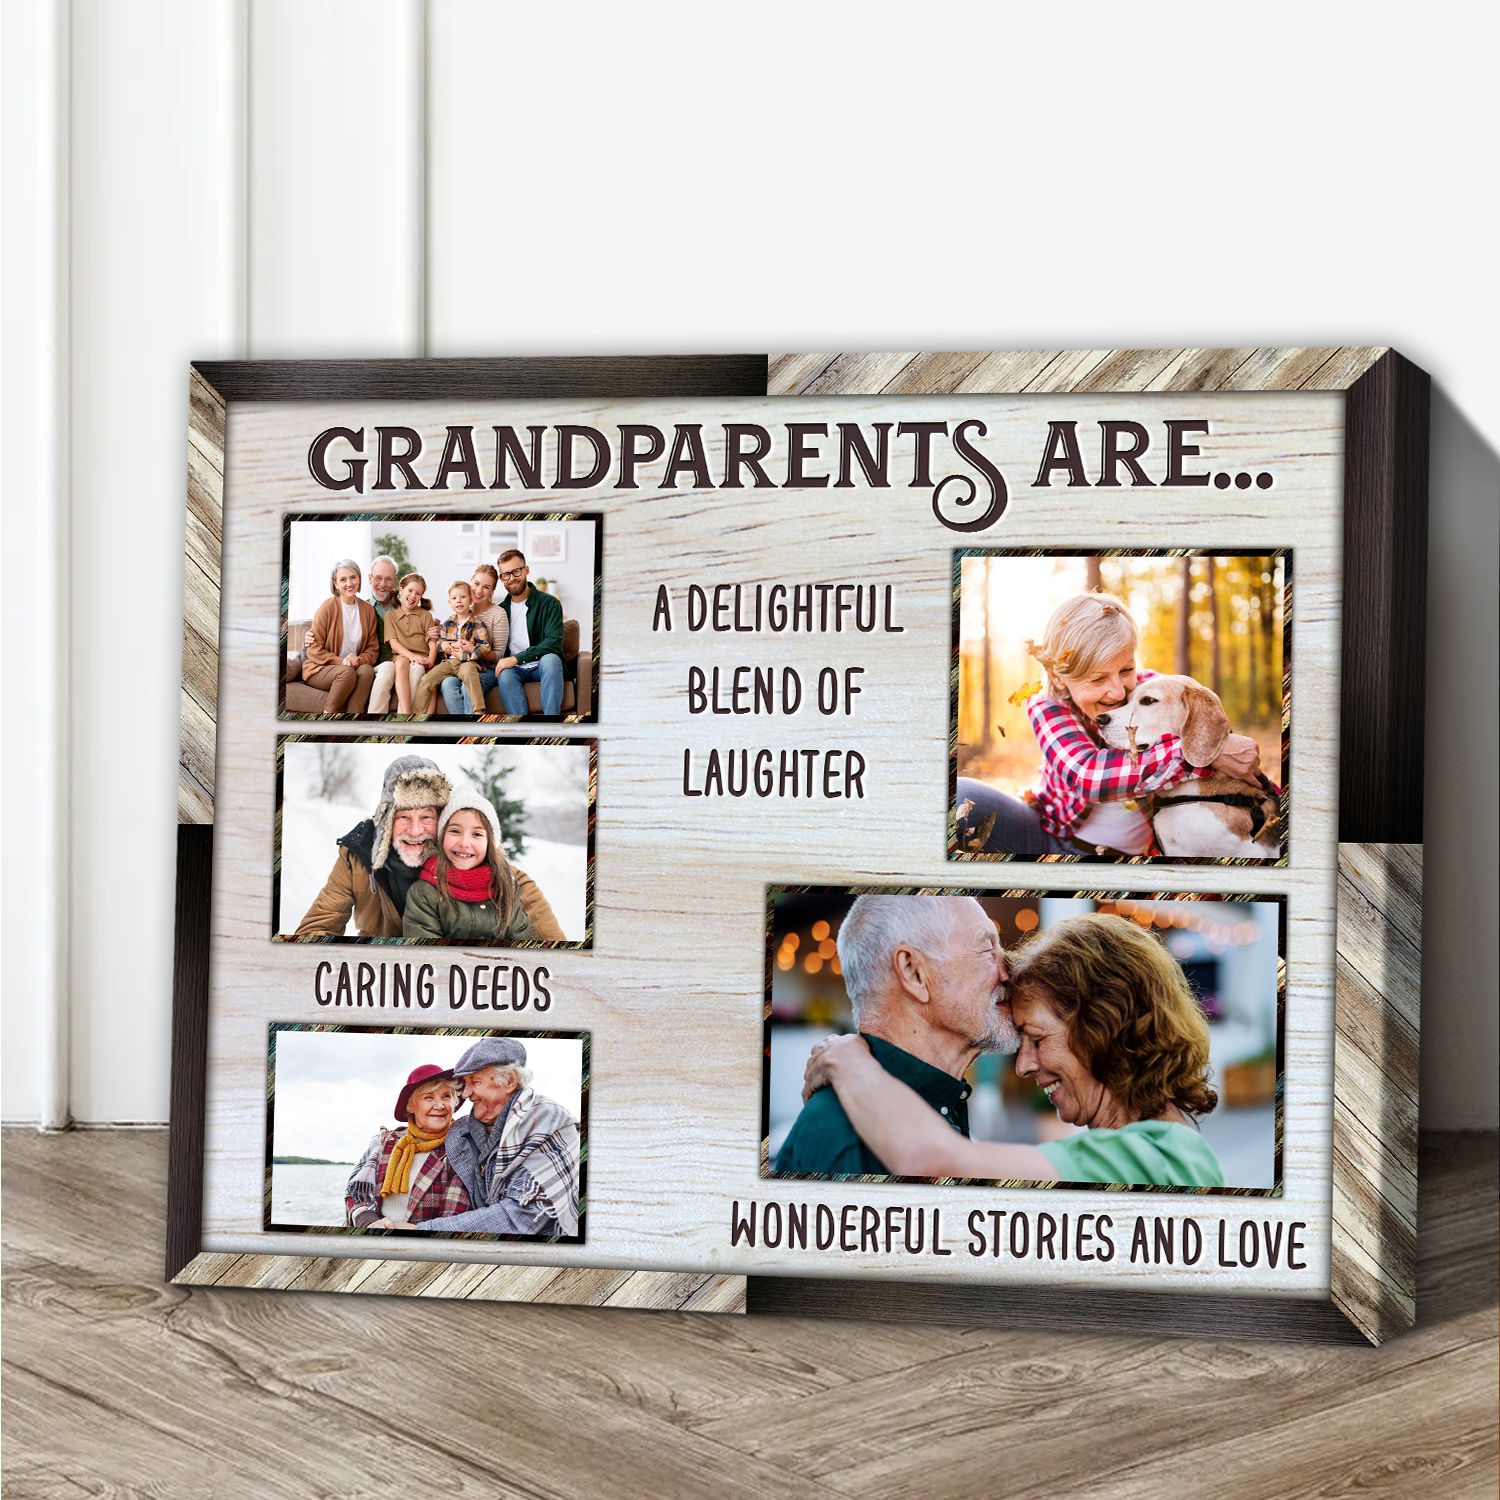 The Best Gift Ideas for Grandparents